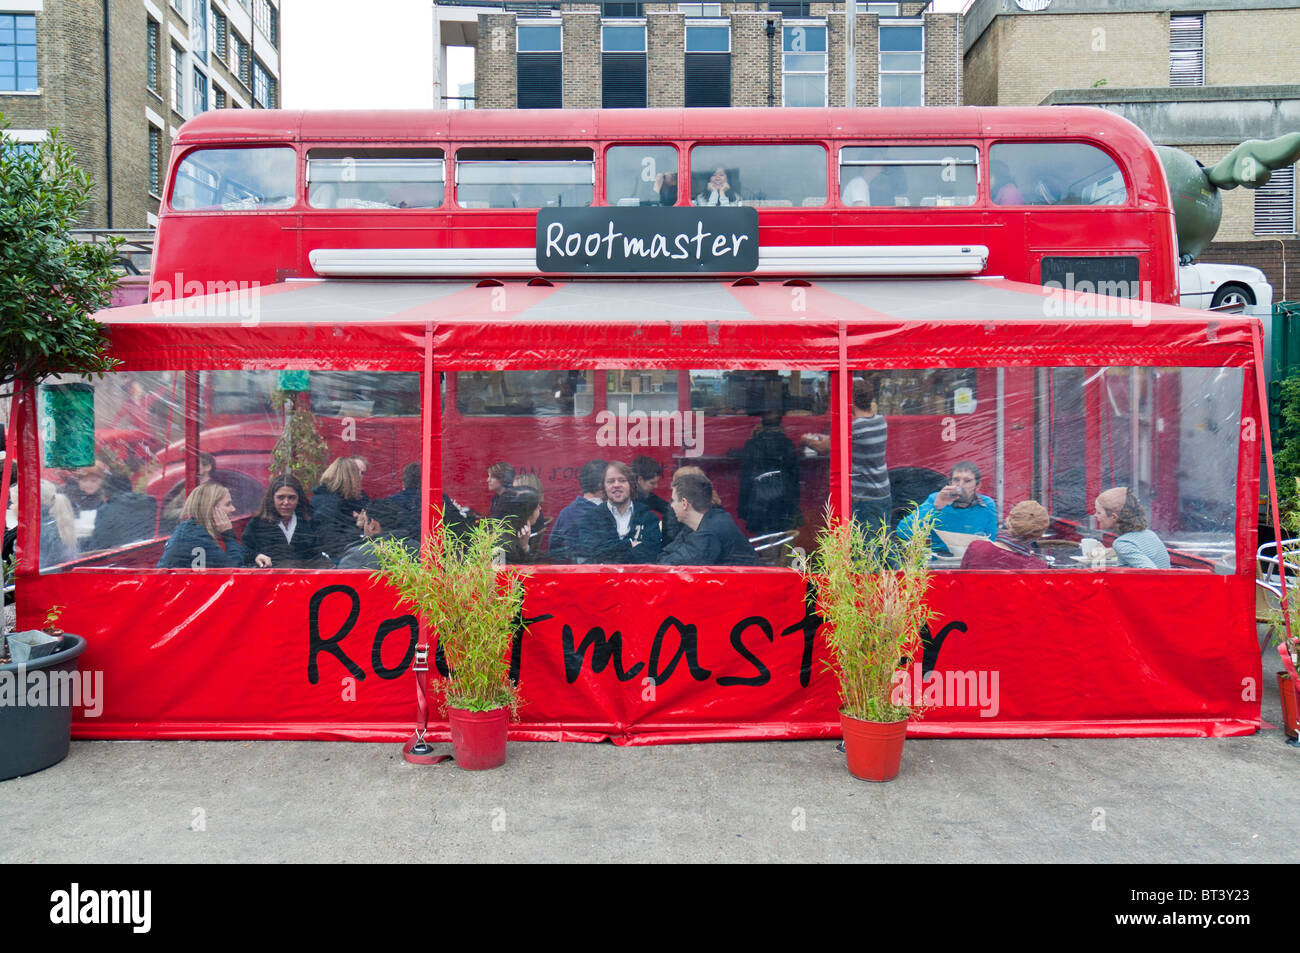 LONDON - OCTOBER 17: Restaurant built inside old double decker routemaster busin Bricklane market, which takes place every Sunda Stock Photo